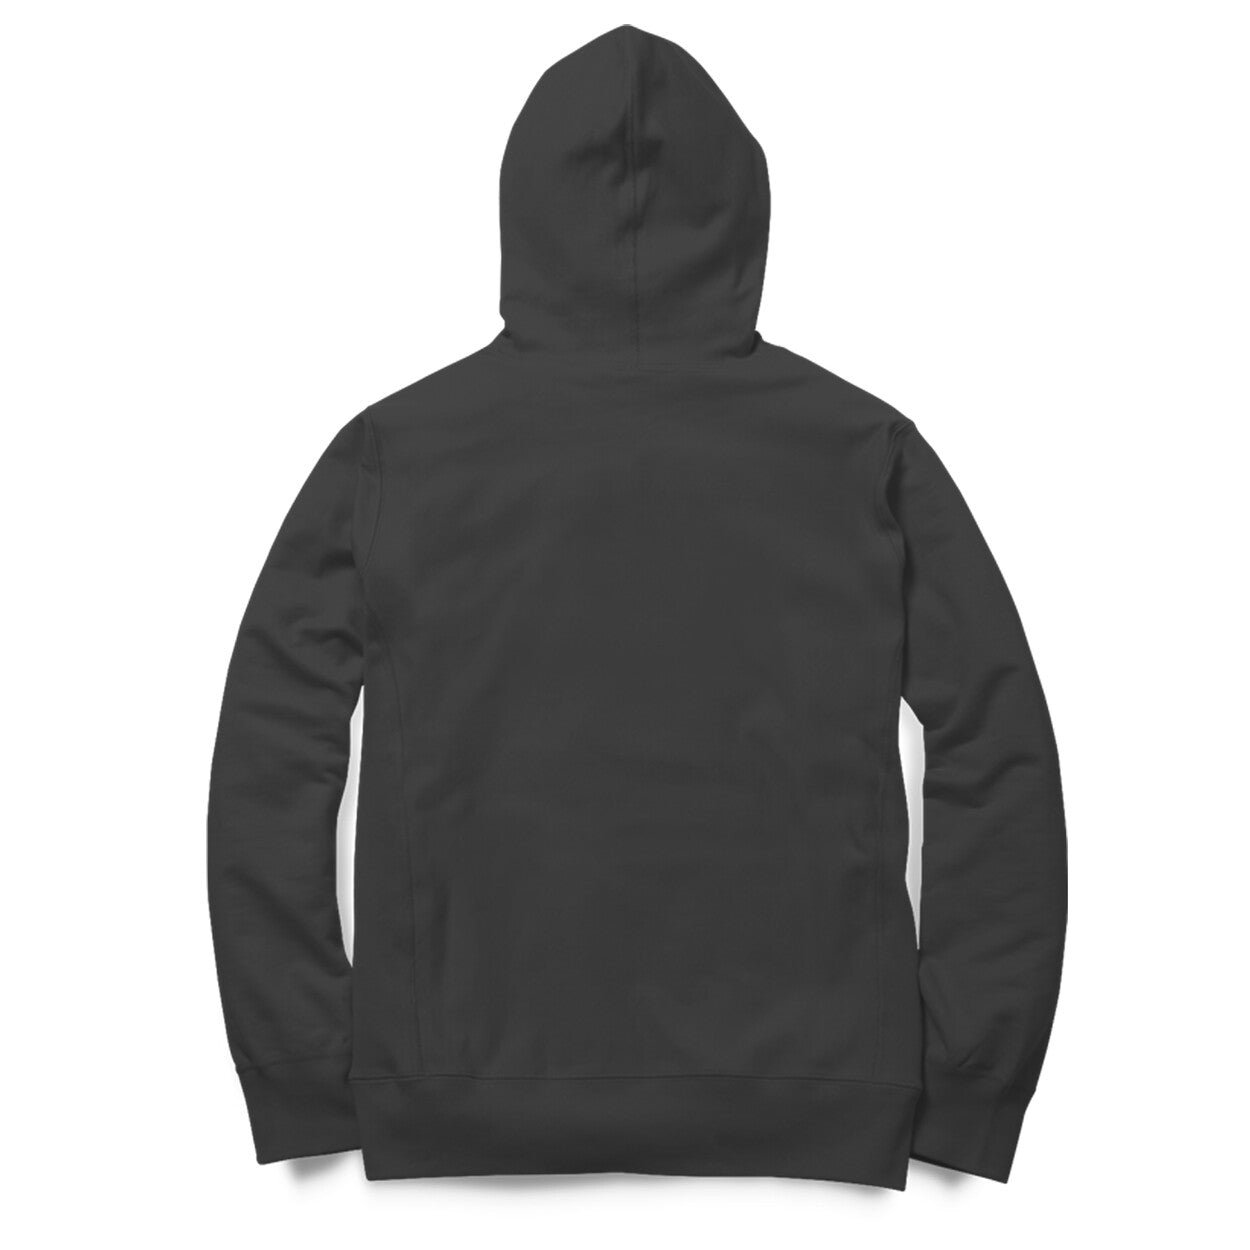 Chase Your Dream - Black Unisex Hoodie